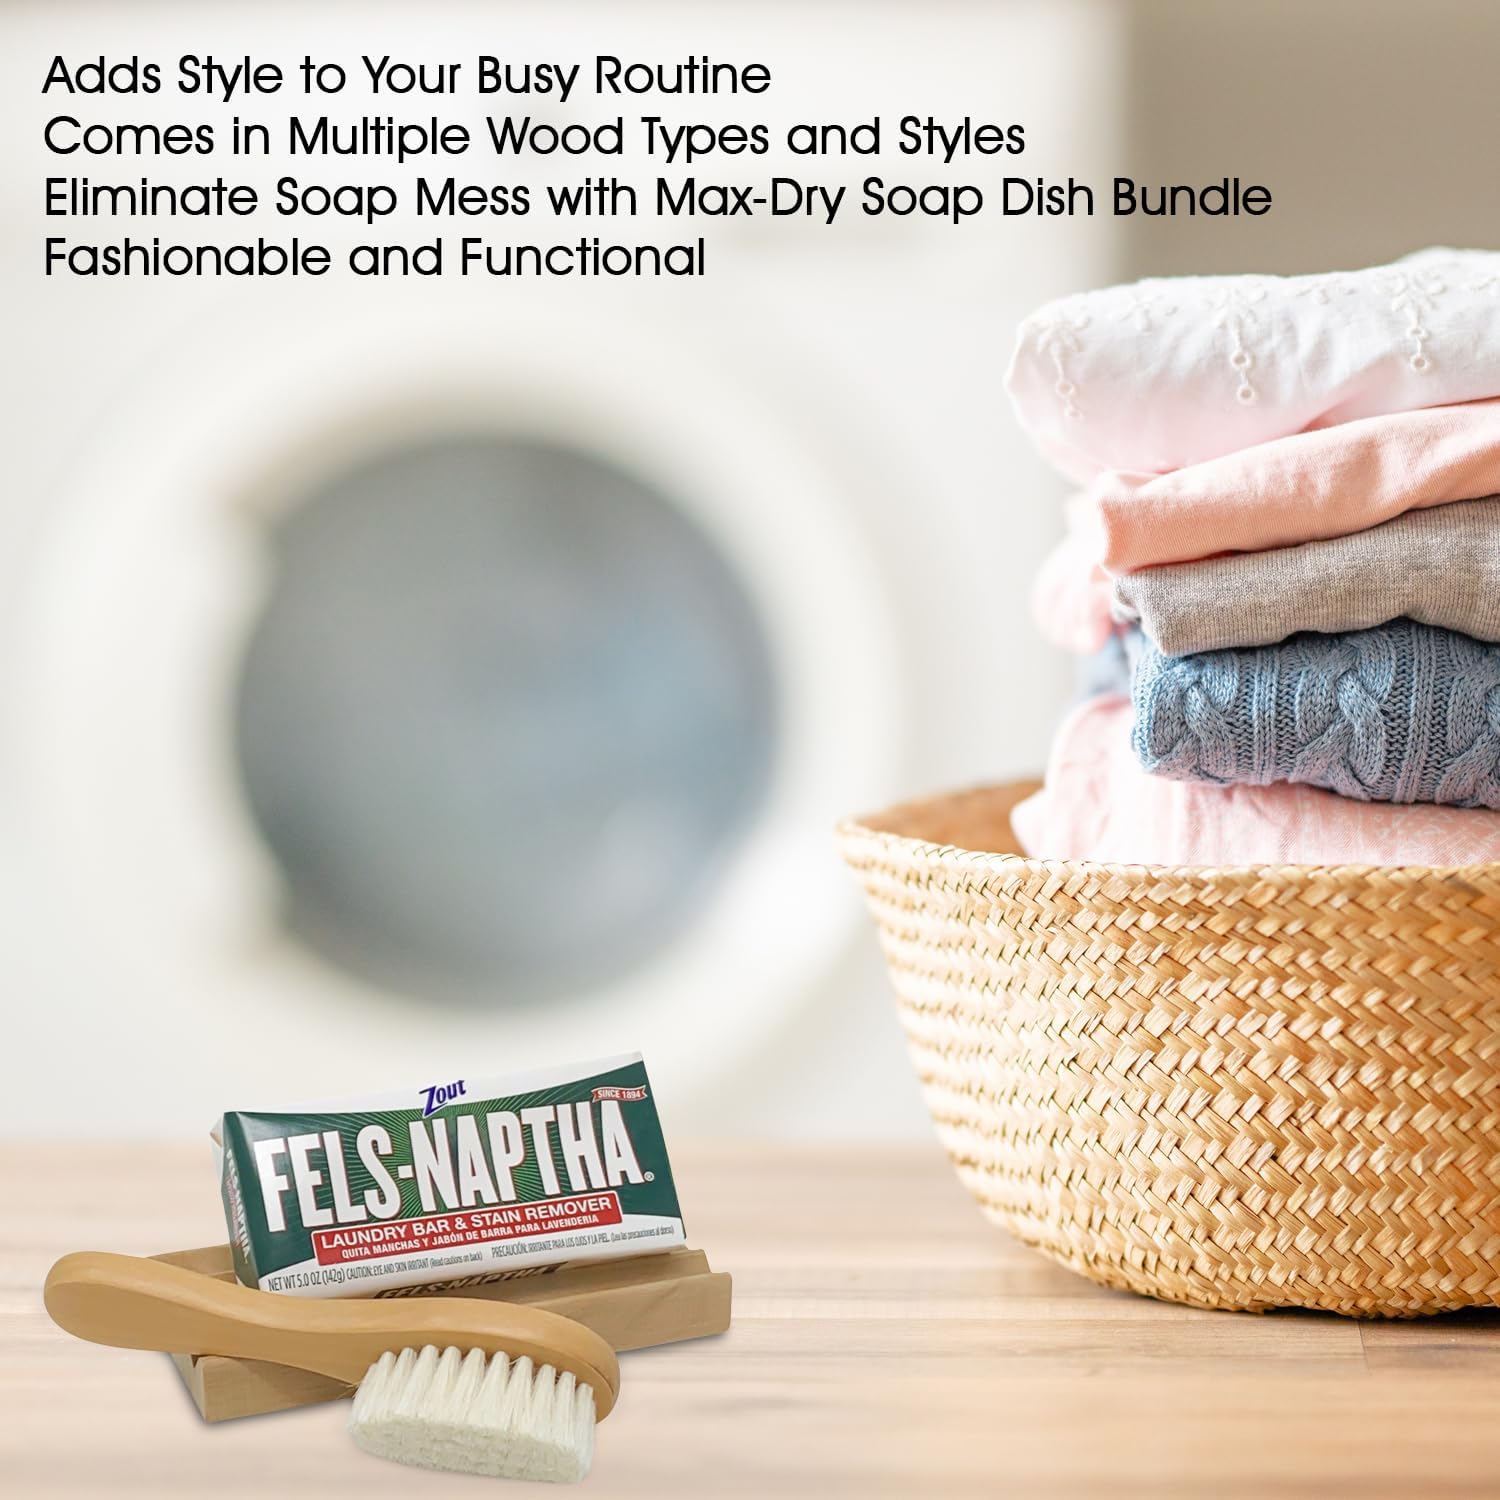 Fels Naptha Laundry Detergent Bar - 5 Ounce Fels Naptha Laundry Bar Soap and Stain Remover Bundle. Get the Ultimate Accessory to your Fels Naptha Soap Bars. (Fabric Safe Brush Bundle) : Health & Household